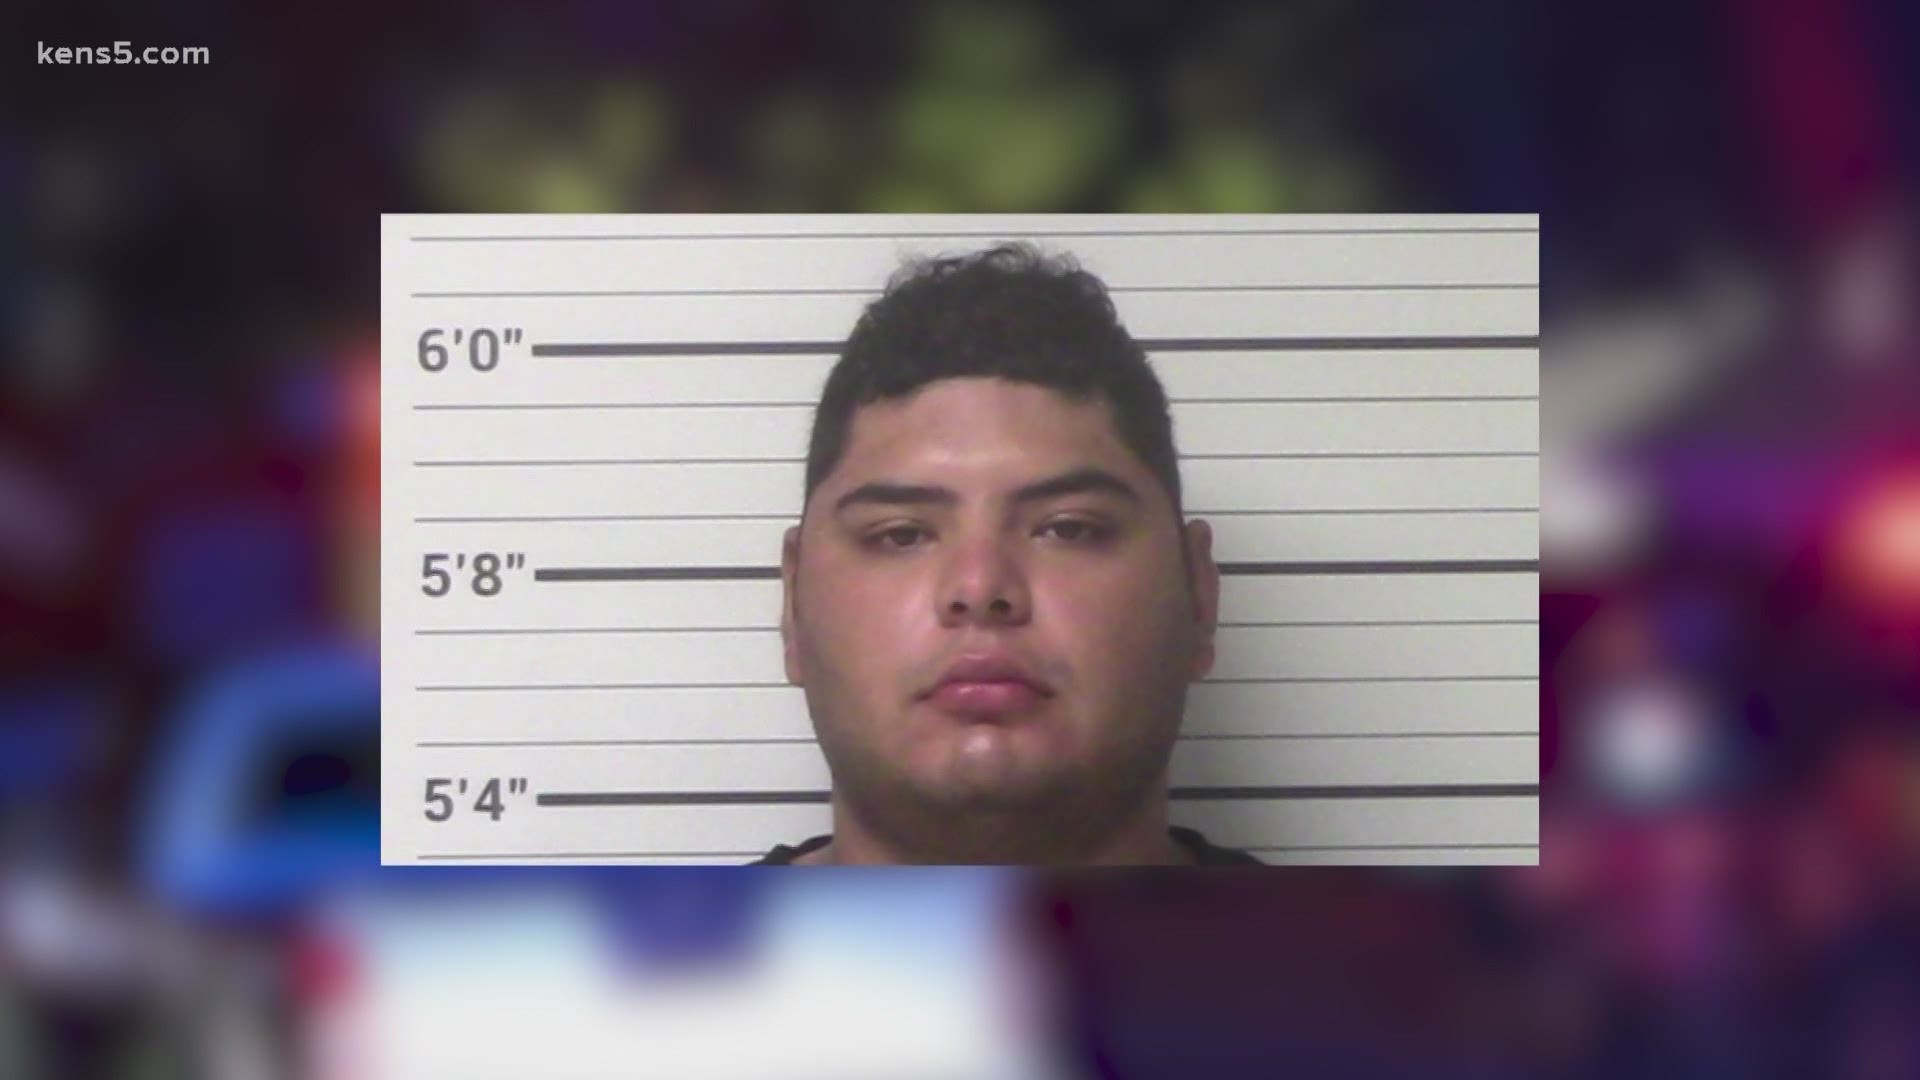 The 23-year-old former Kerrville firefighter is back behind bars after being re-arrested Friday.